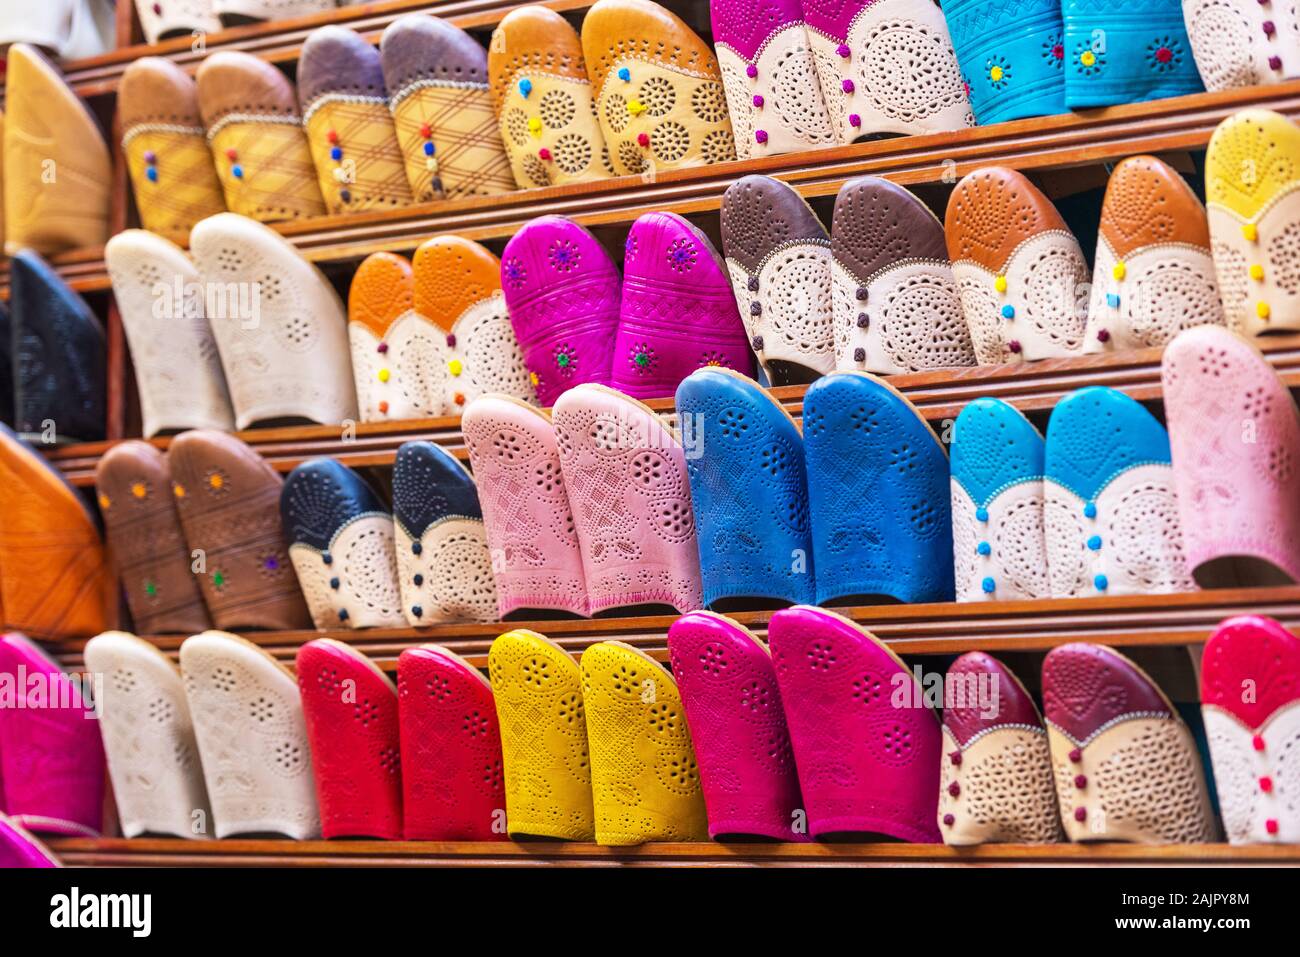 Traditional vibrant Moroccan slippers - 'babouches' on the market in Fez, Morocco Stock Photo